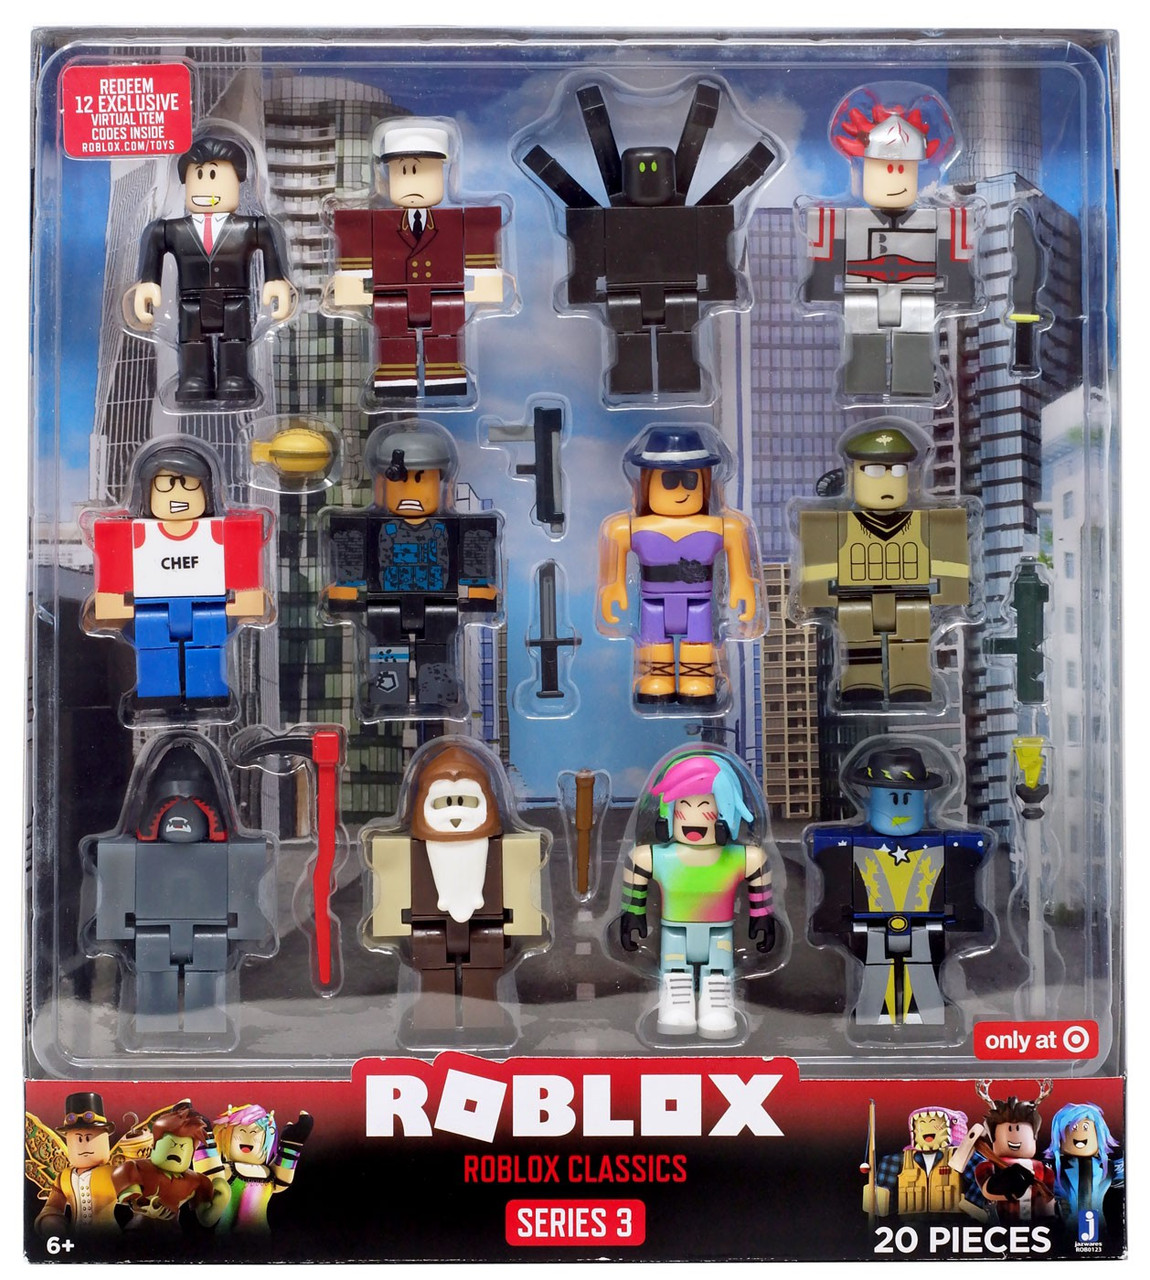 Roblox Series 3 Roblox Classics Exclusive 3 Action Figure 12 Pack - buy roblox series 3 the beast action figure mystery box virtual